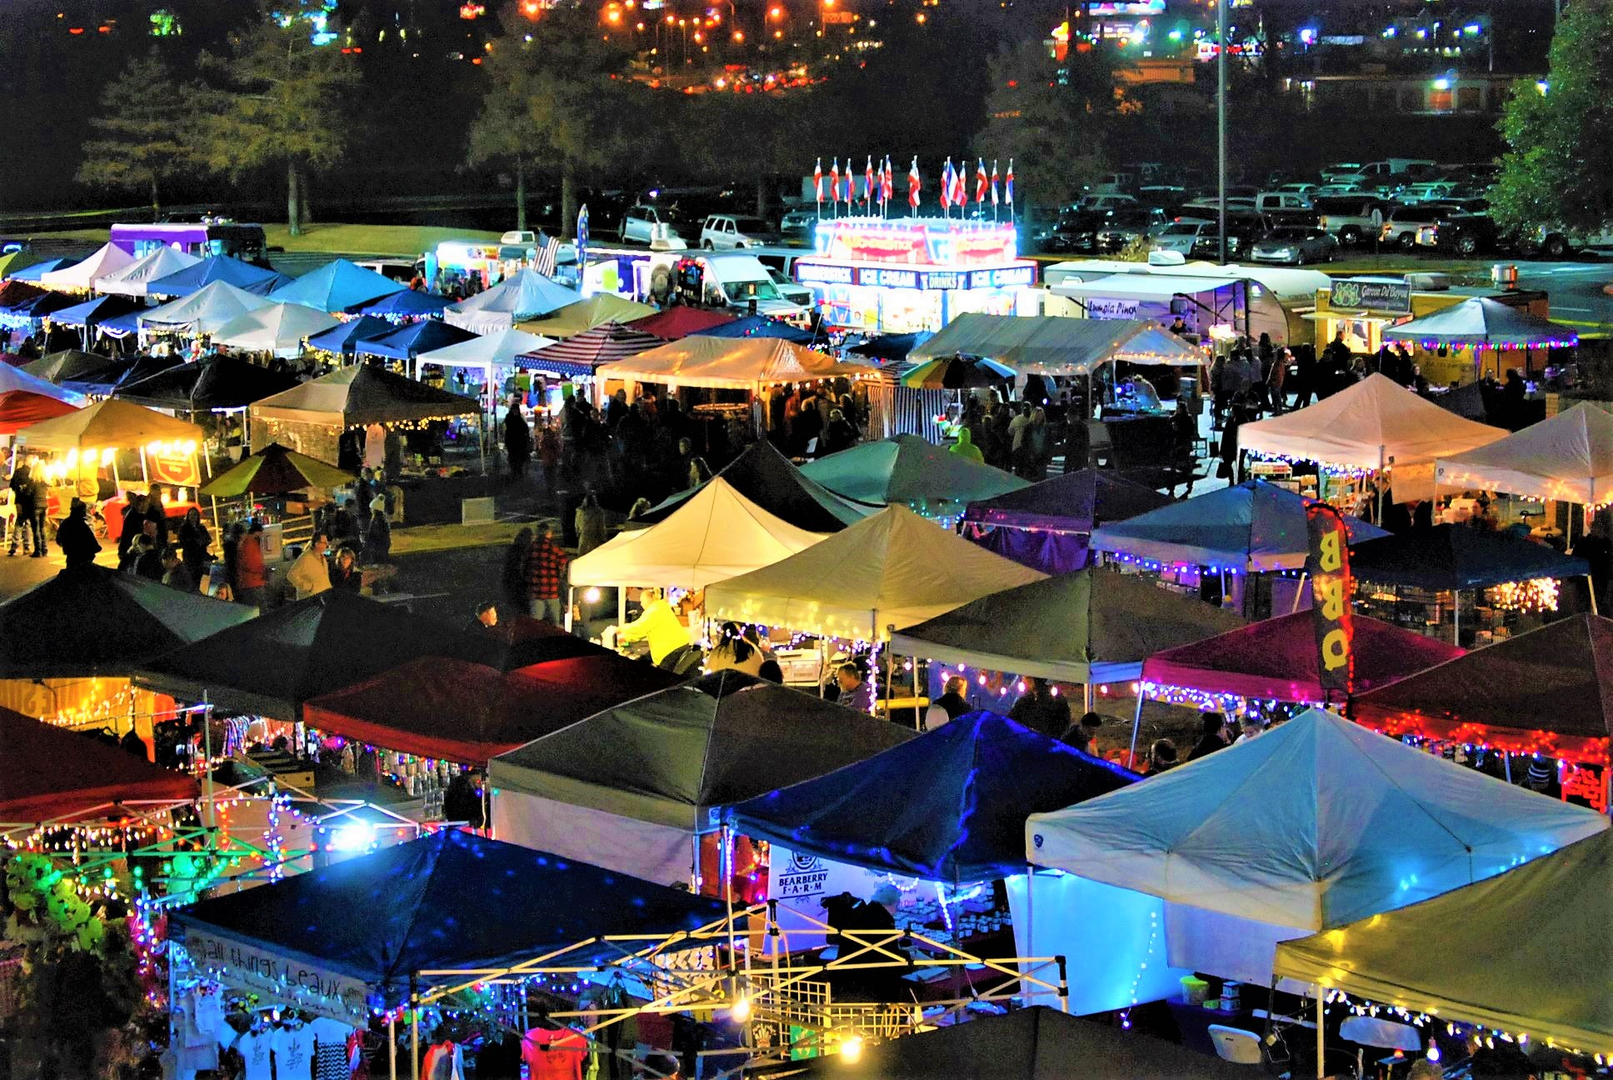 The Bossier Night Market returns this Saturday to the Shreveport Area!